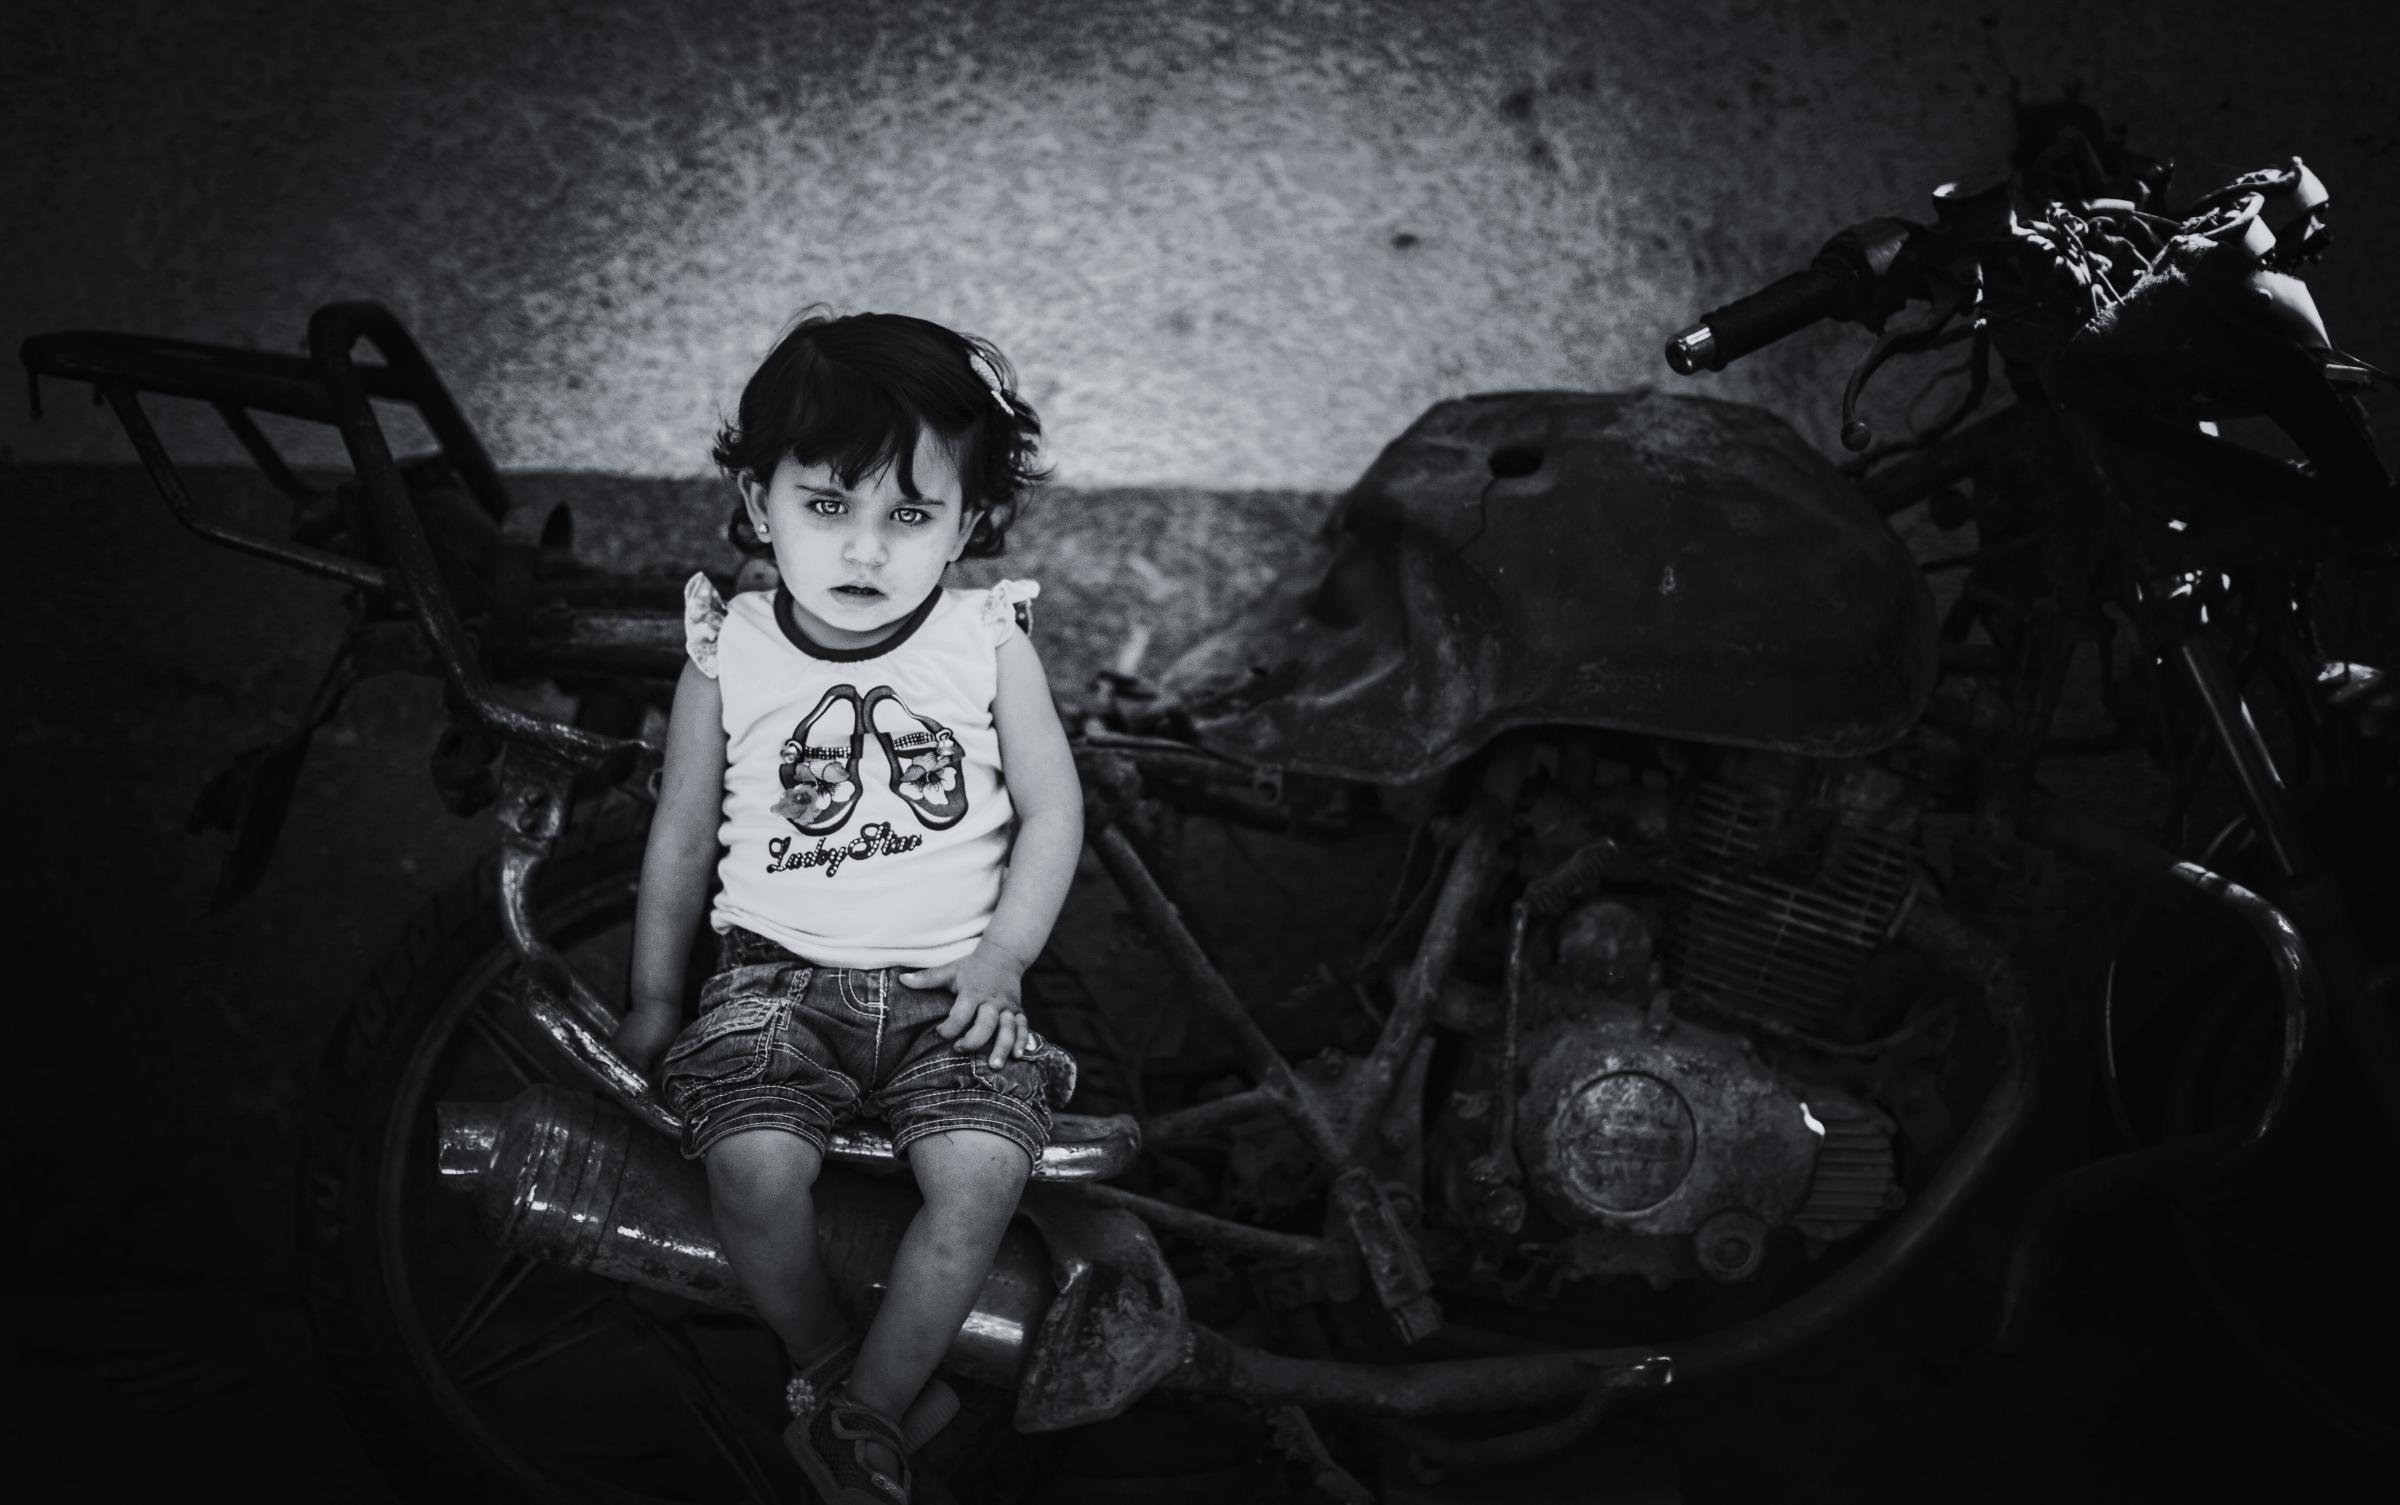 Broken souvenirs -  Islam Qreqe, 14 months old, sitting on a burnet...